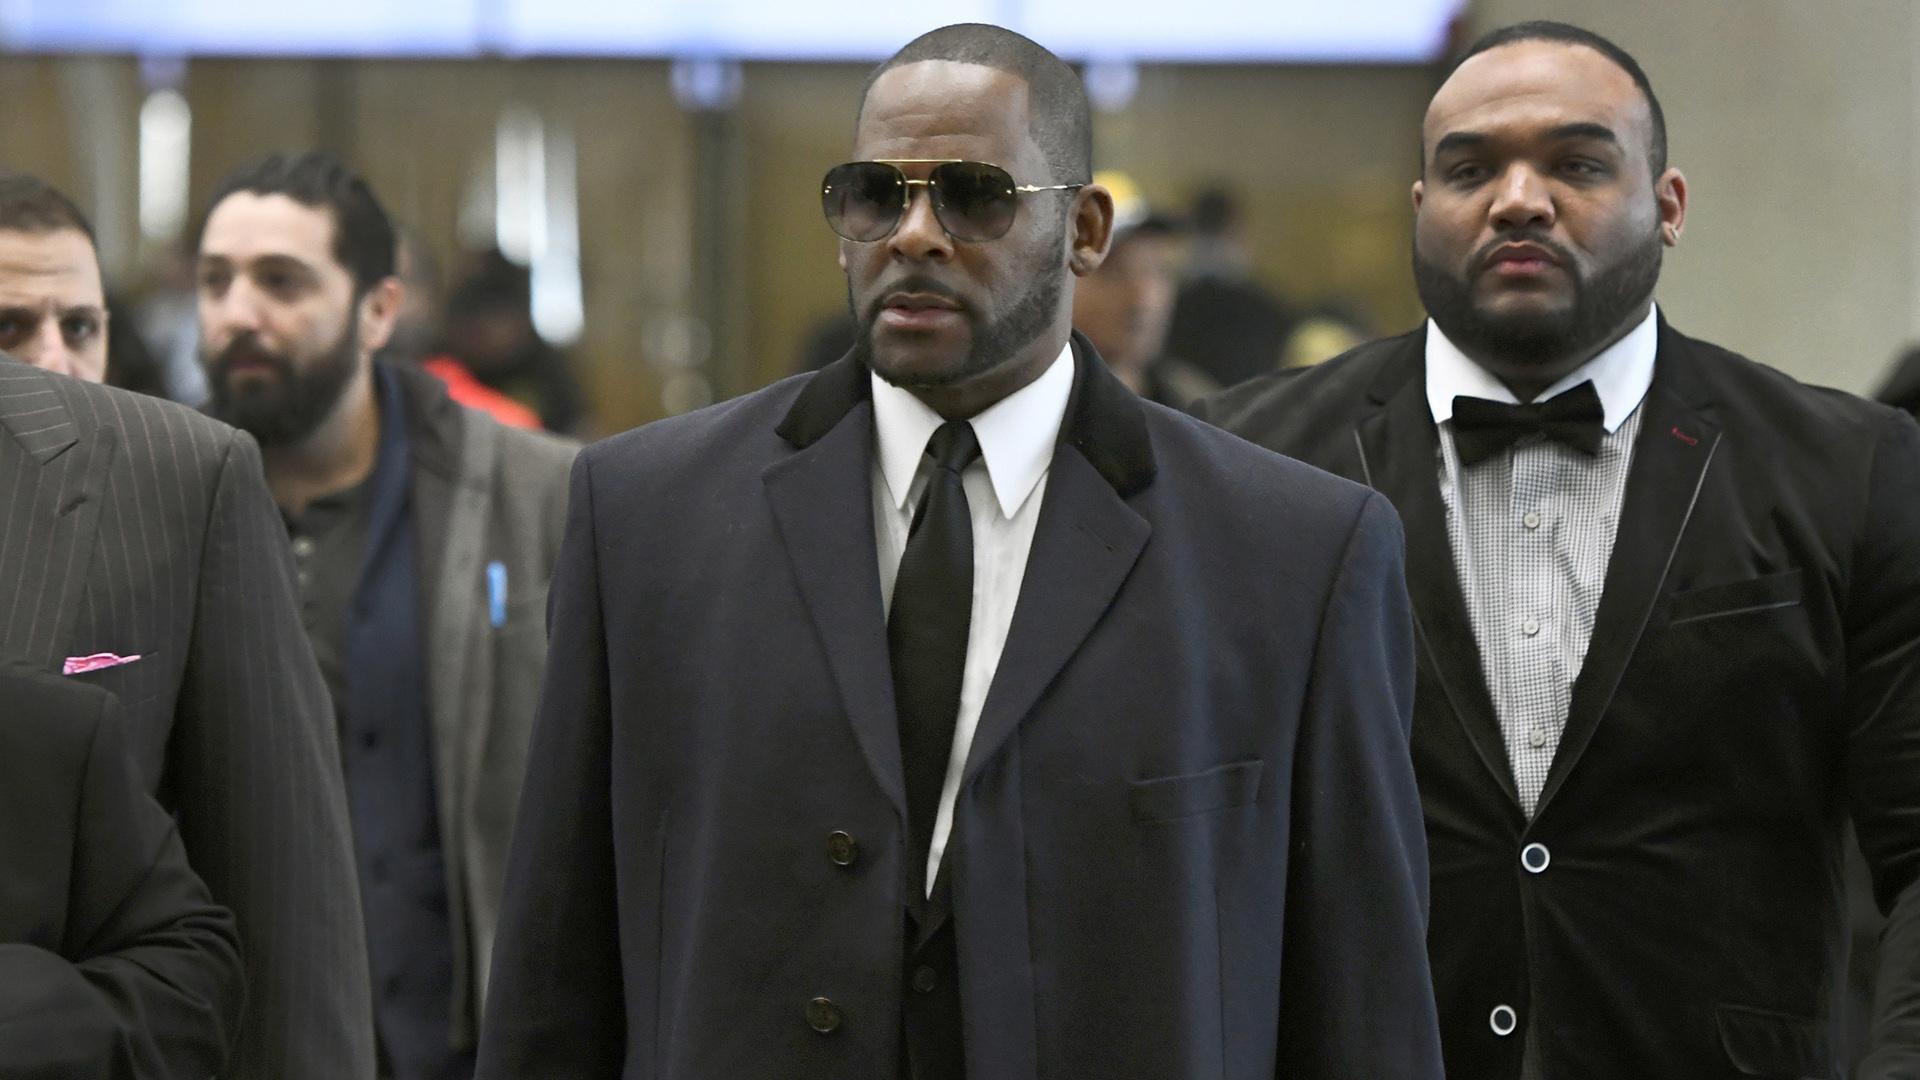 In this May 7, 2019 file photo, Musician R. Kelly, center, arrives at the Leighton Criminal Court building for a hearing in Chicago. (AP Photo / Matt Marton, File)